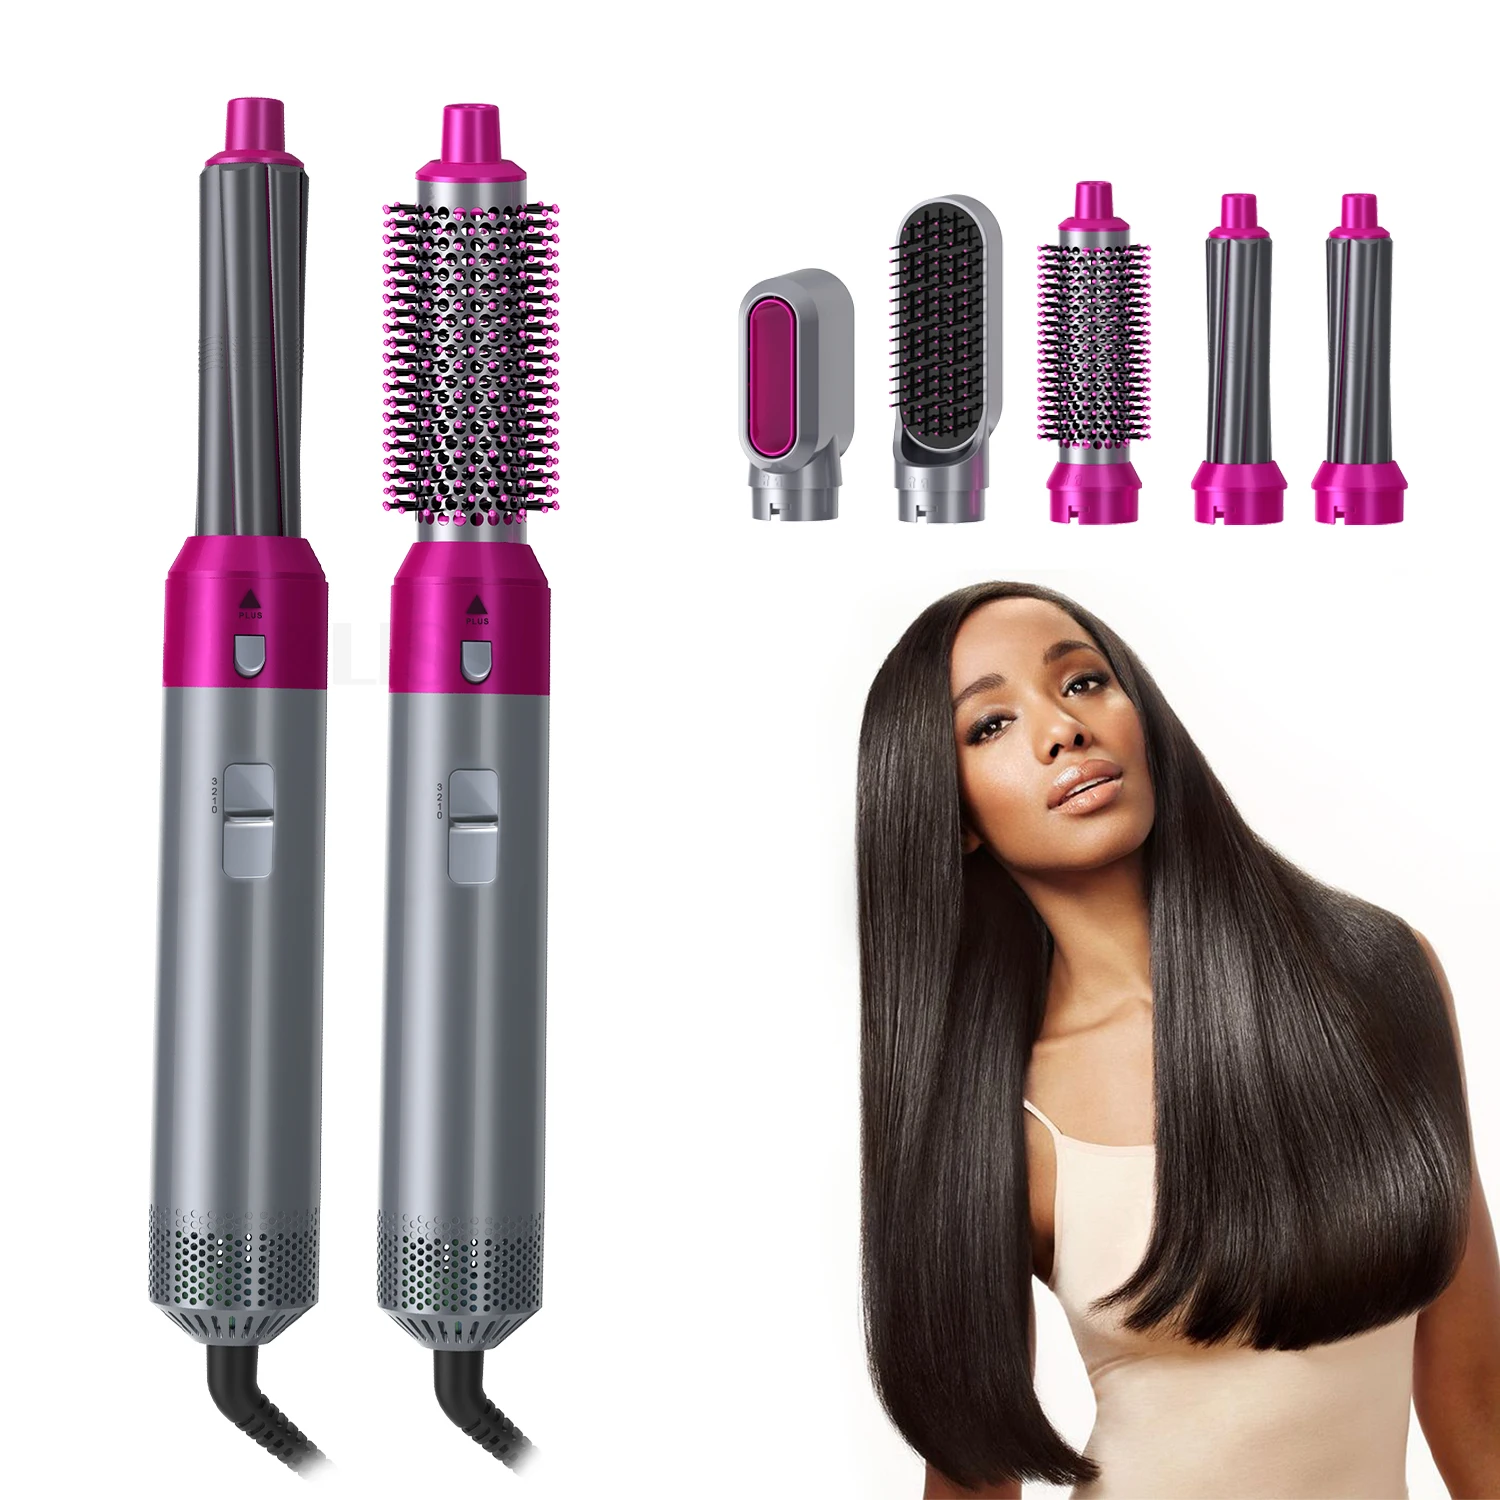 2021 Best Hair Styler 5 In 1 Hot Air Brush Set With Hair Curling Wand - Buy  2021 Best Hair Styler 5 In 1 Hot Air Brush,5 In 1 Air Styler,5 In 1 Hot Air  Styler Product on 